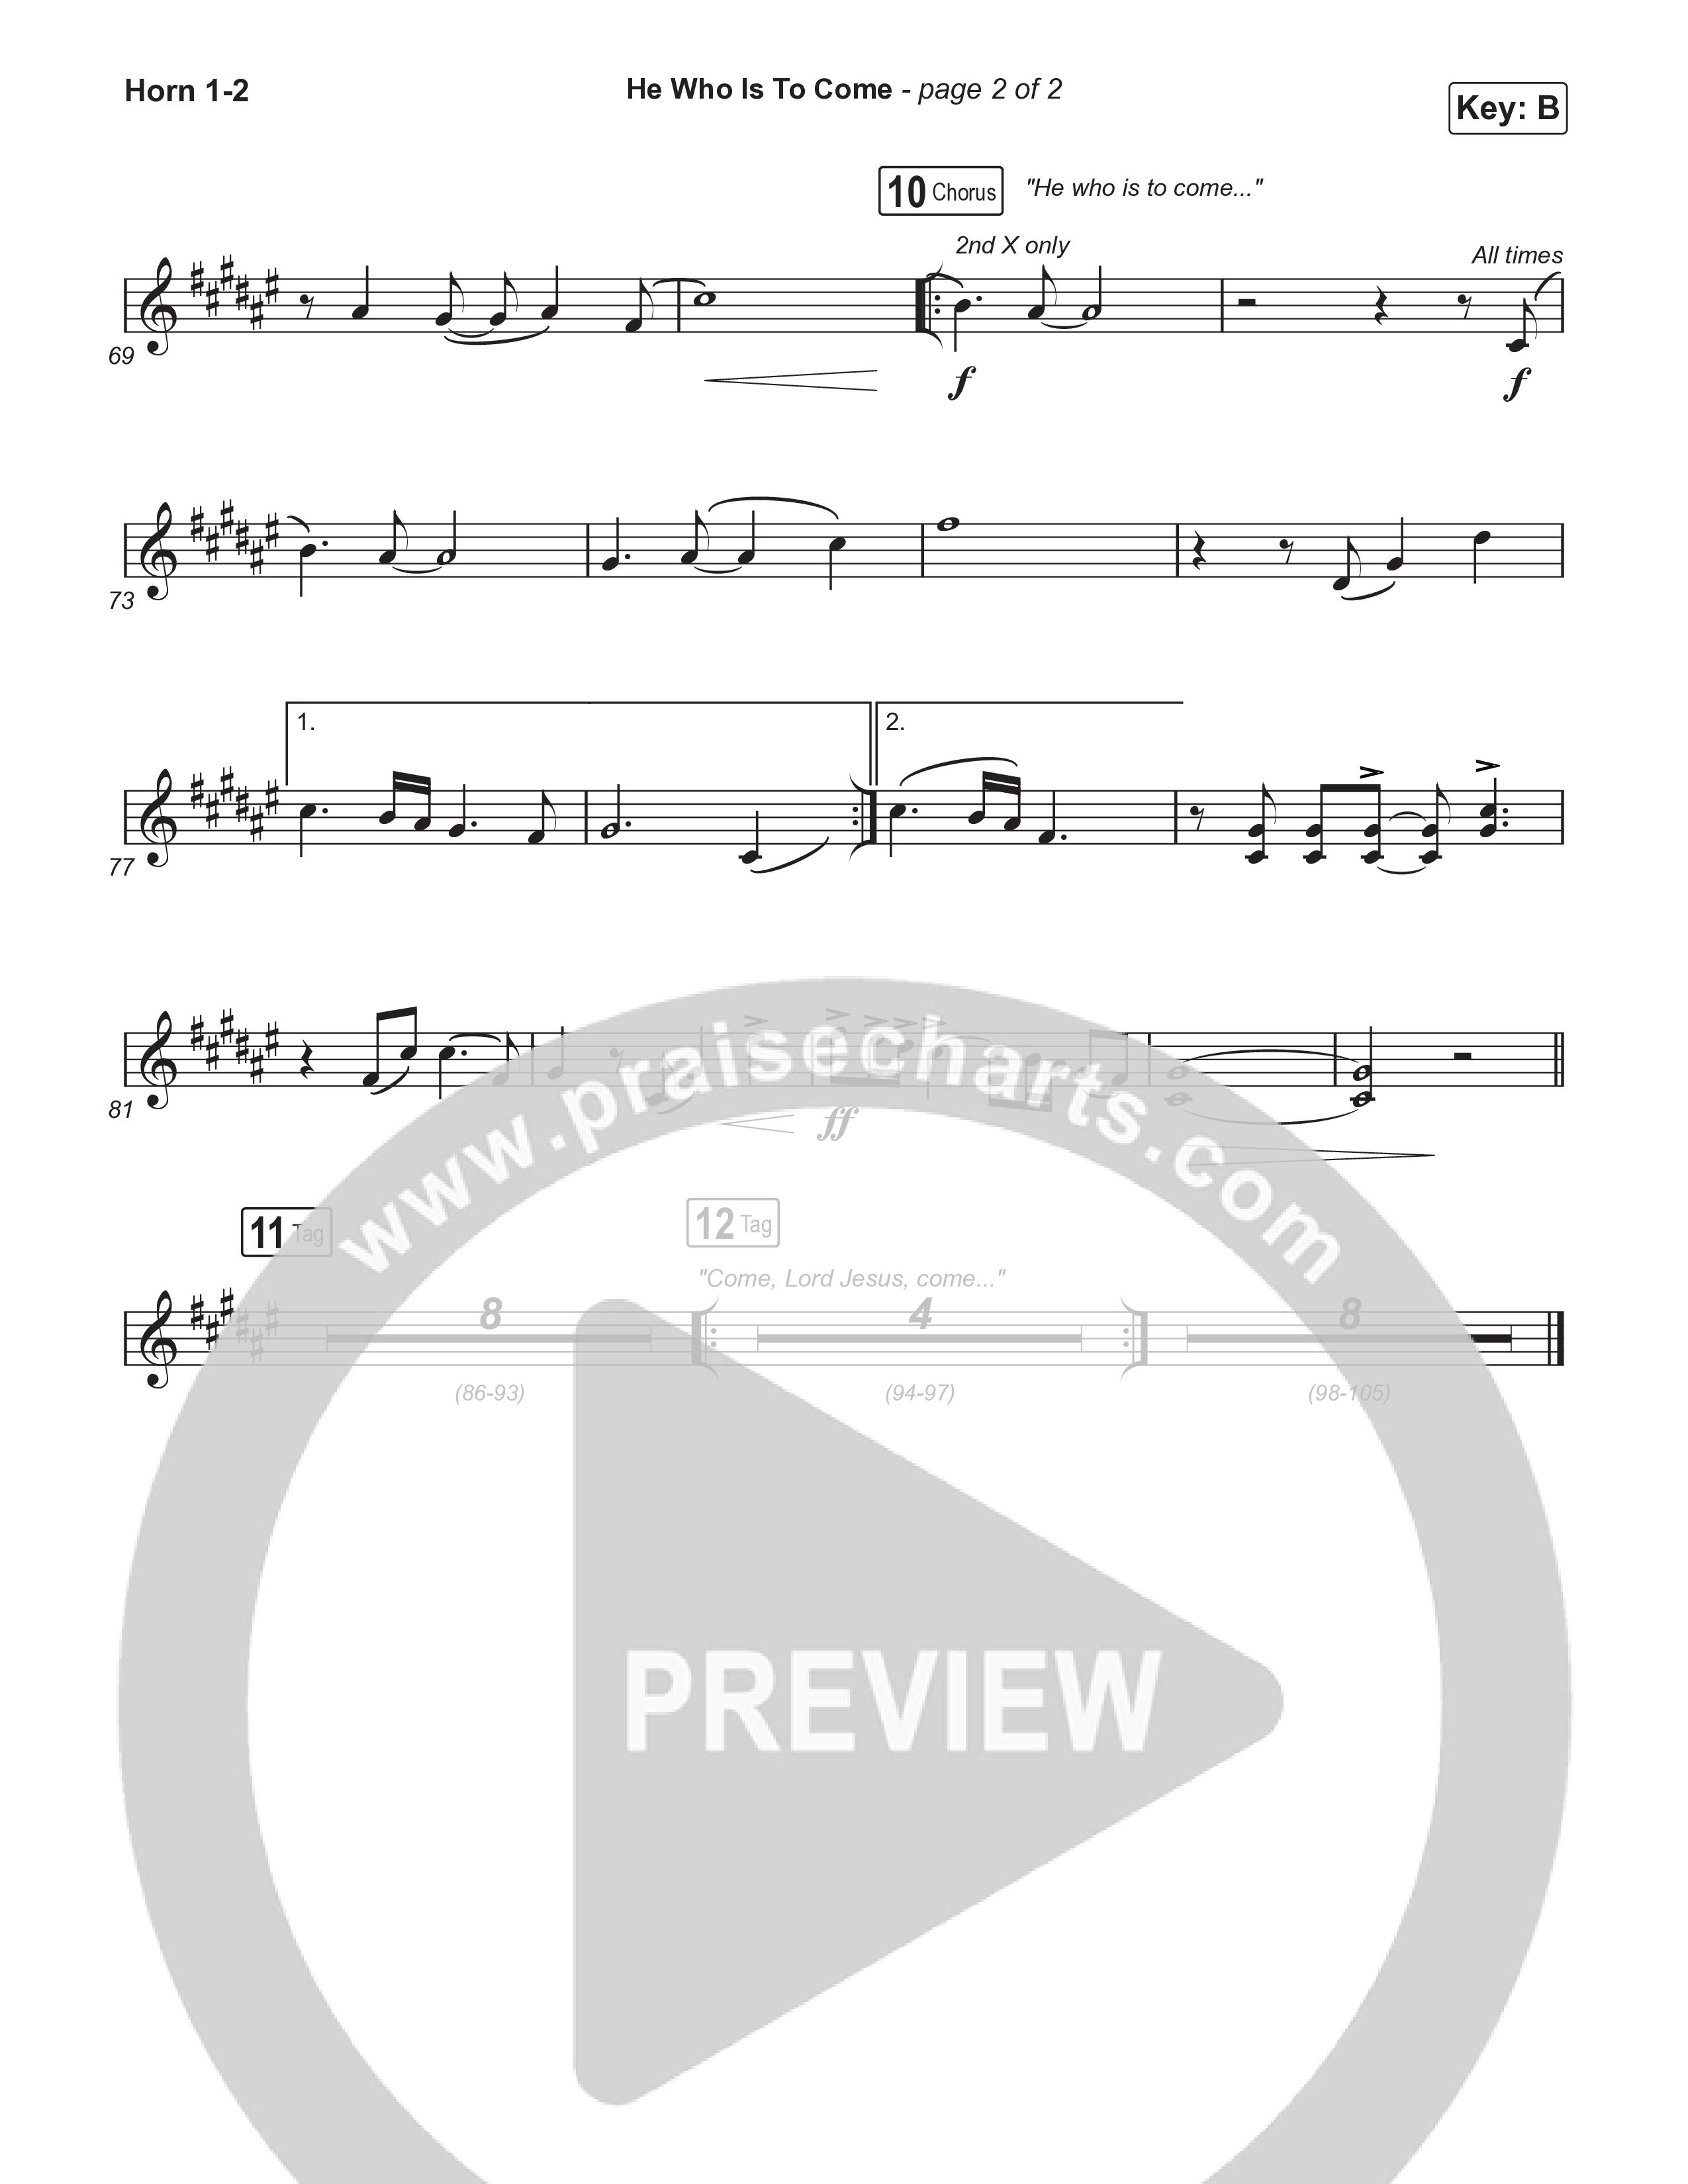 He Who Is To Come (Choral Anthem SATB) French Horn 1,2 (Passion / Cody Carnes / Kristian Stanfill / Arr. Luke Gambill)